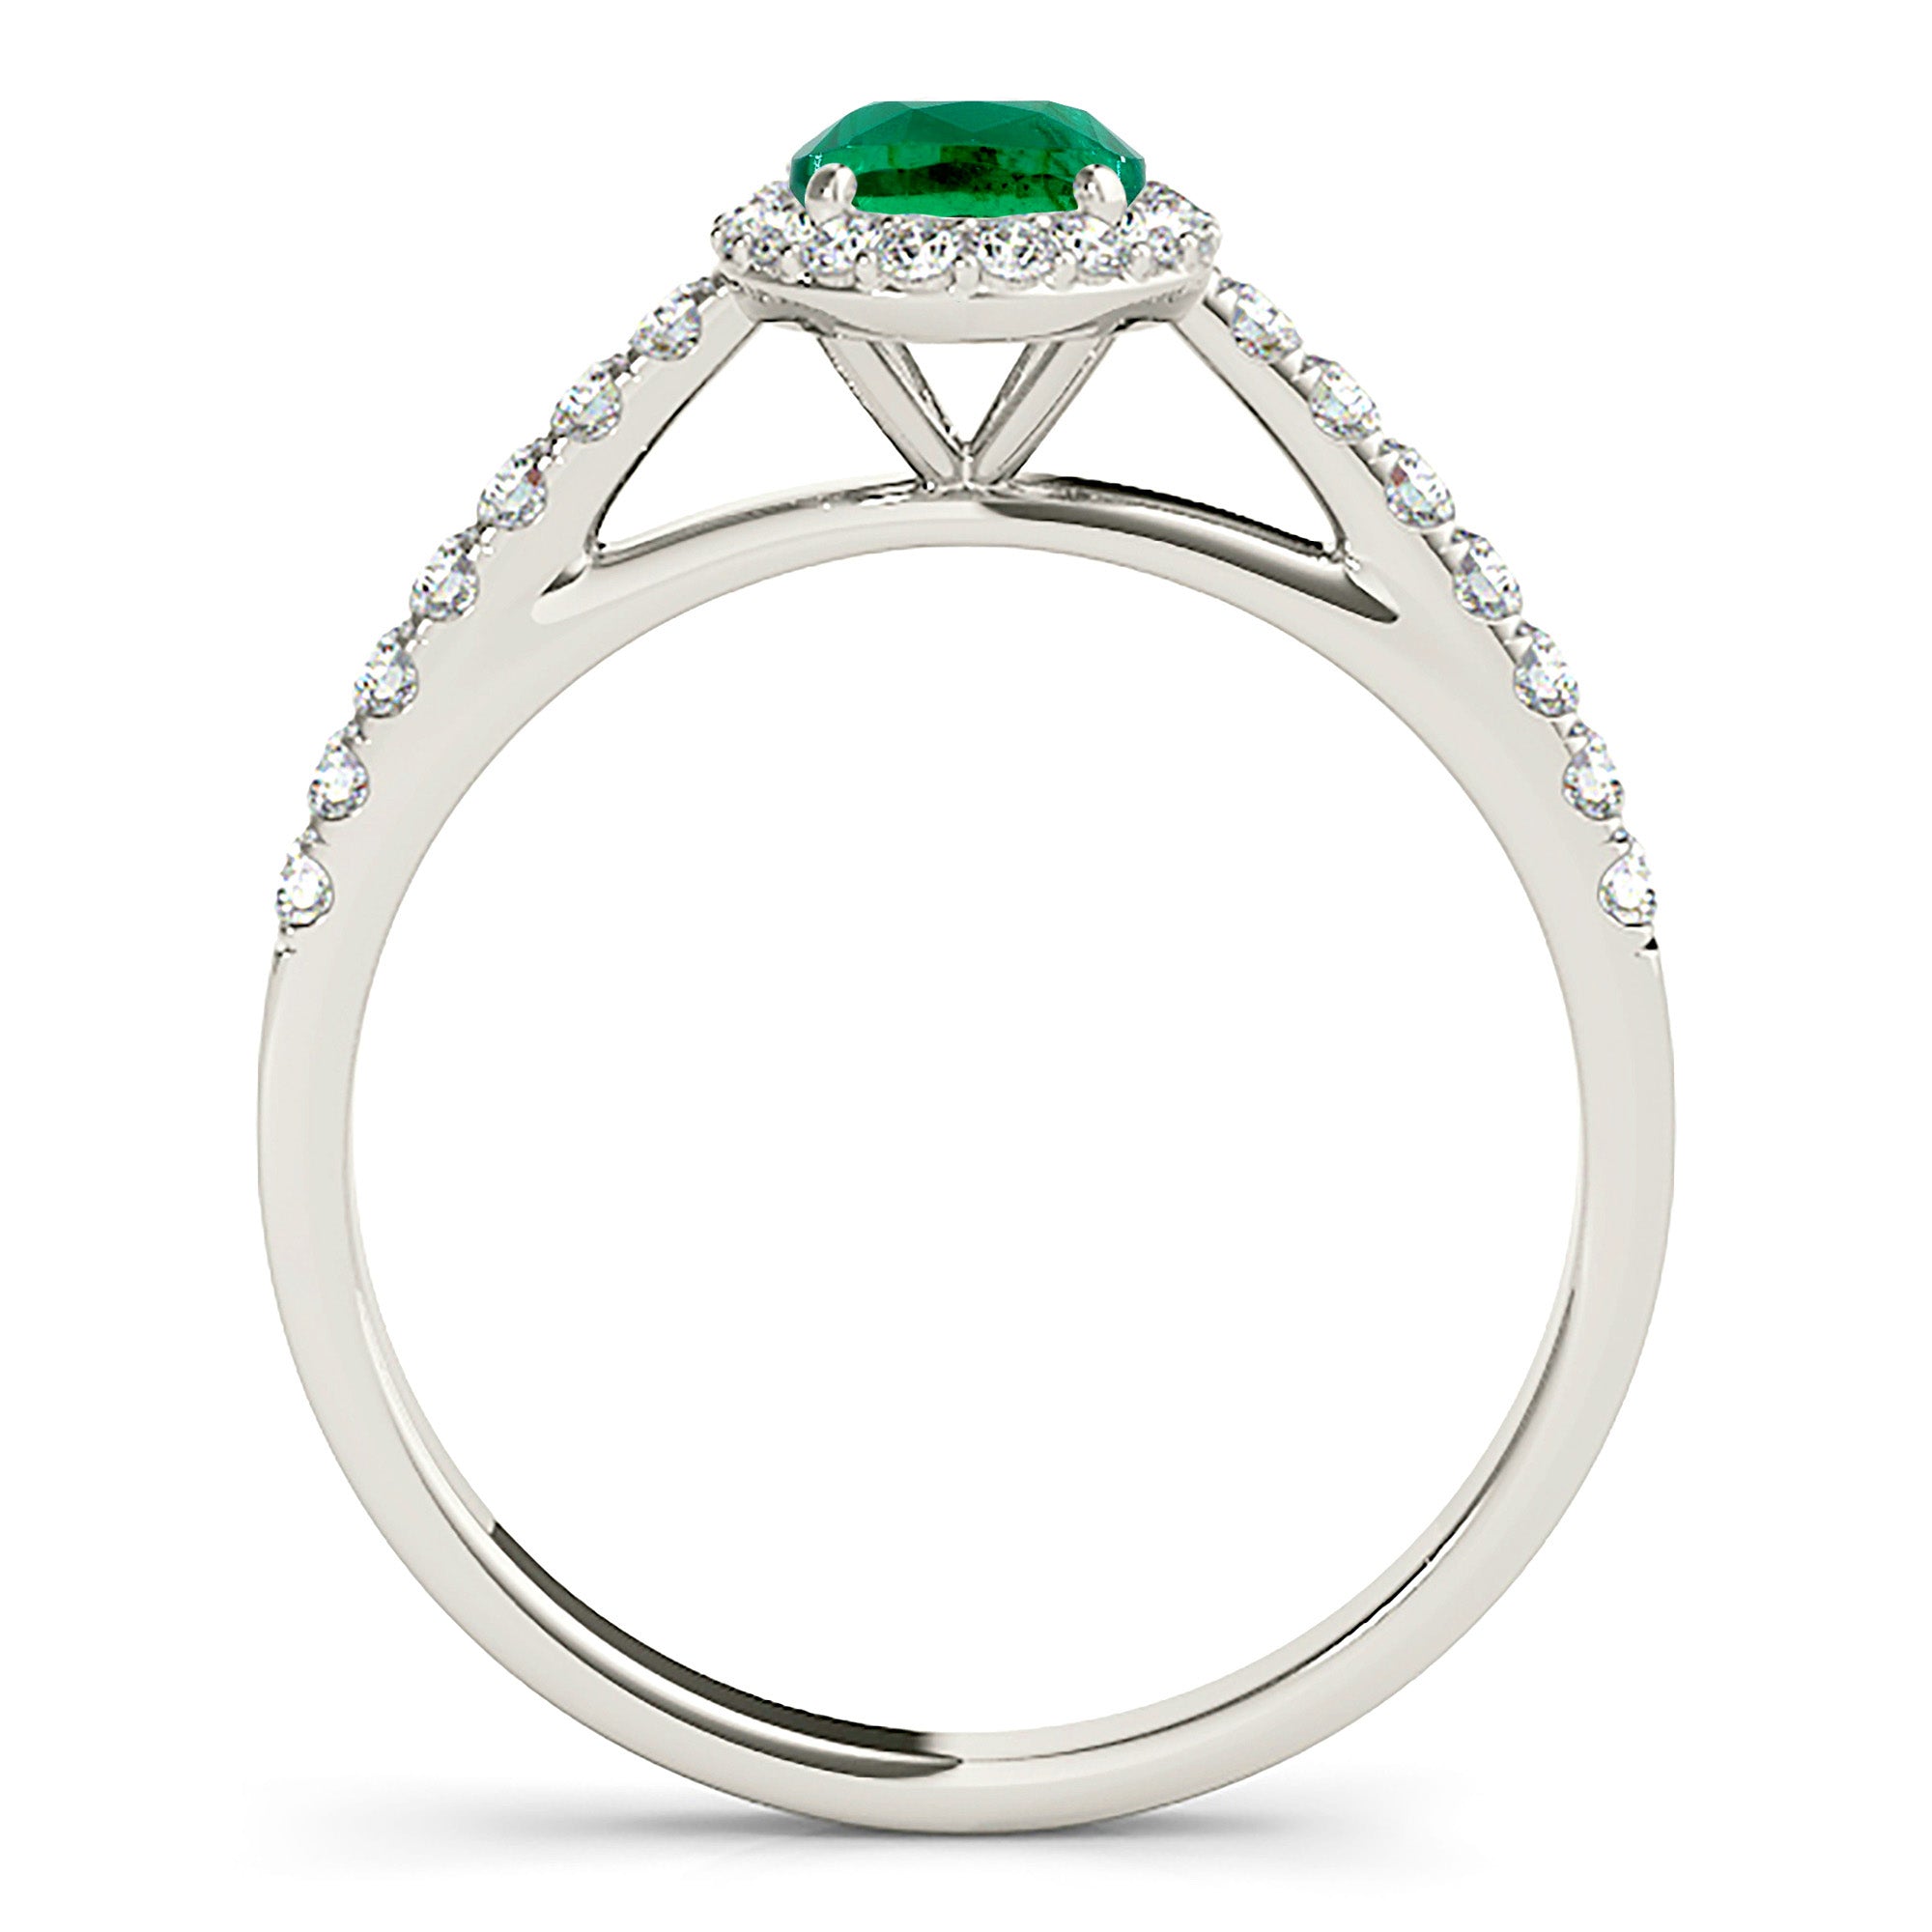 1.30 ct. Genuine Oval Emerald With 0.25 ctw. Diamond Halo And Thin Diamond Band-in 14K/18K White, Yellow, Rose Gold and Platinum - Christmas Jewelry Gift -VIRABYANI